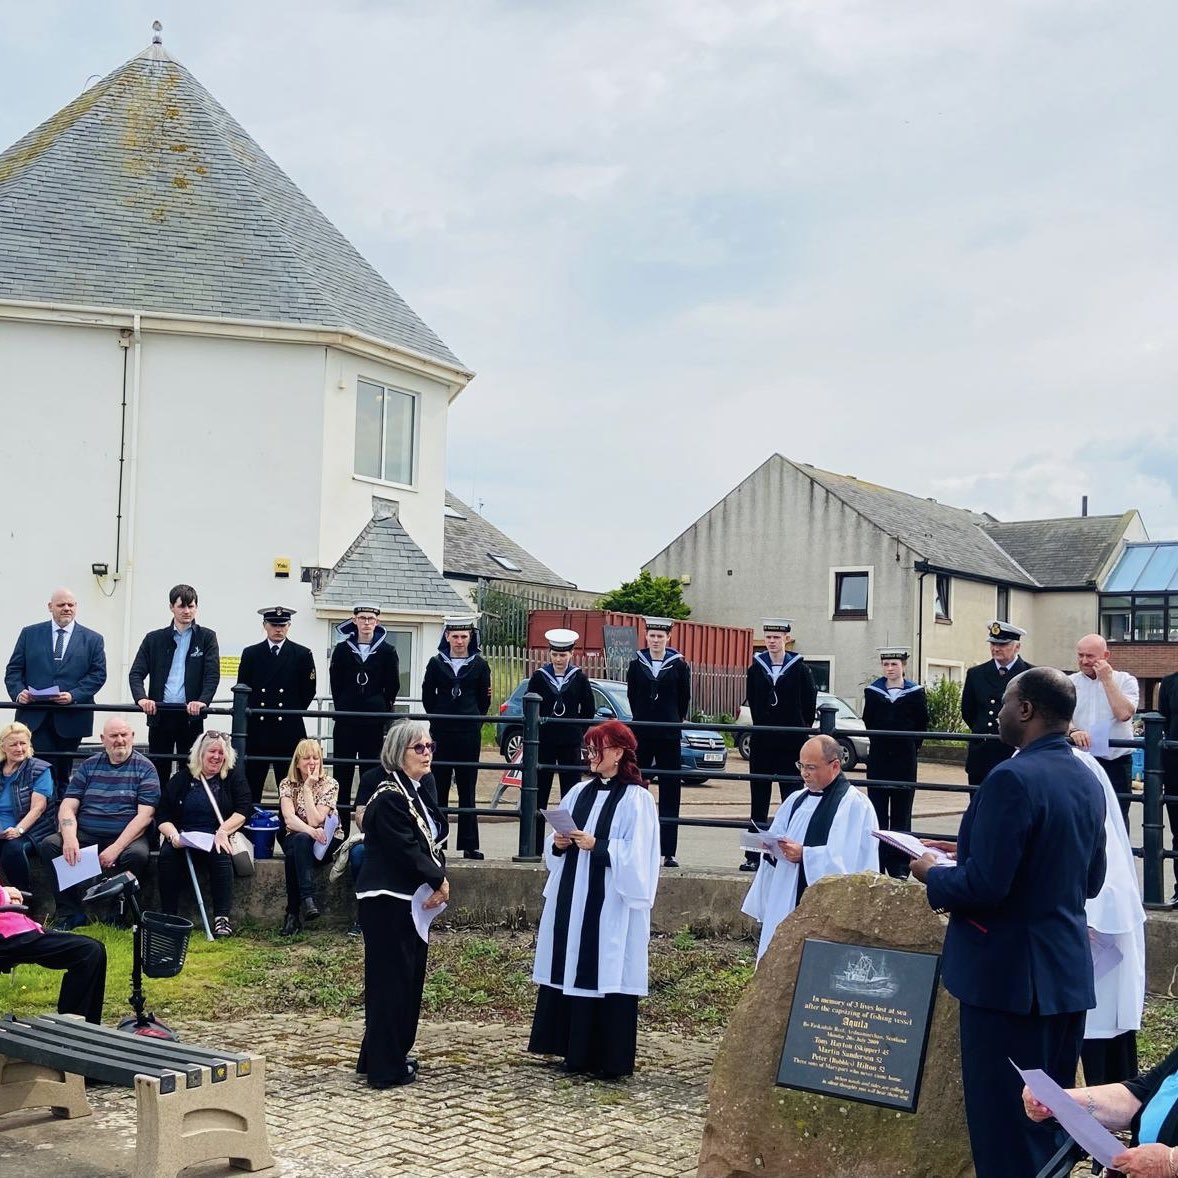 This afternoon I attended the first National Fishing Remembrance Day in Maryport, a chance to commemorate lives lost at sea and pay tribute to their valuable service of our fishermen.